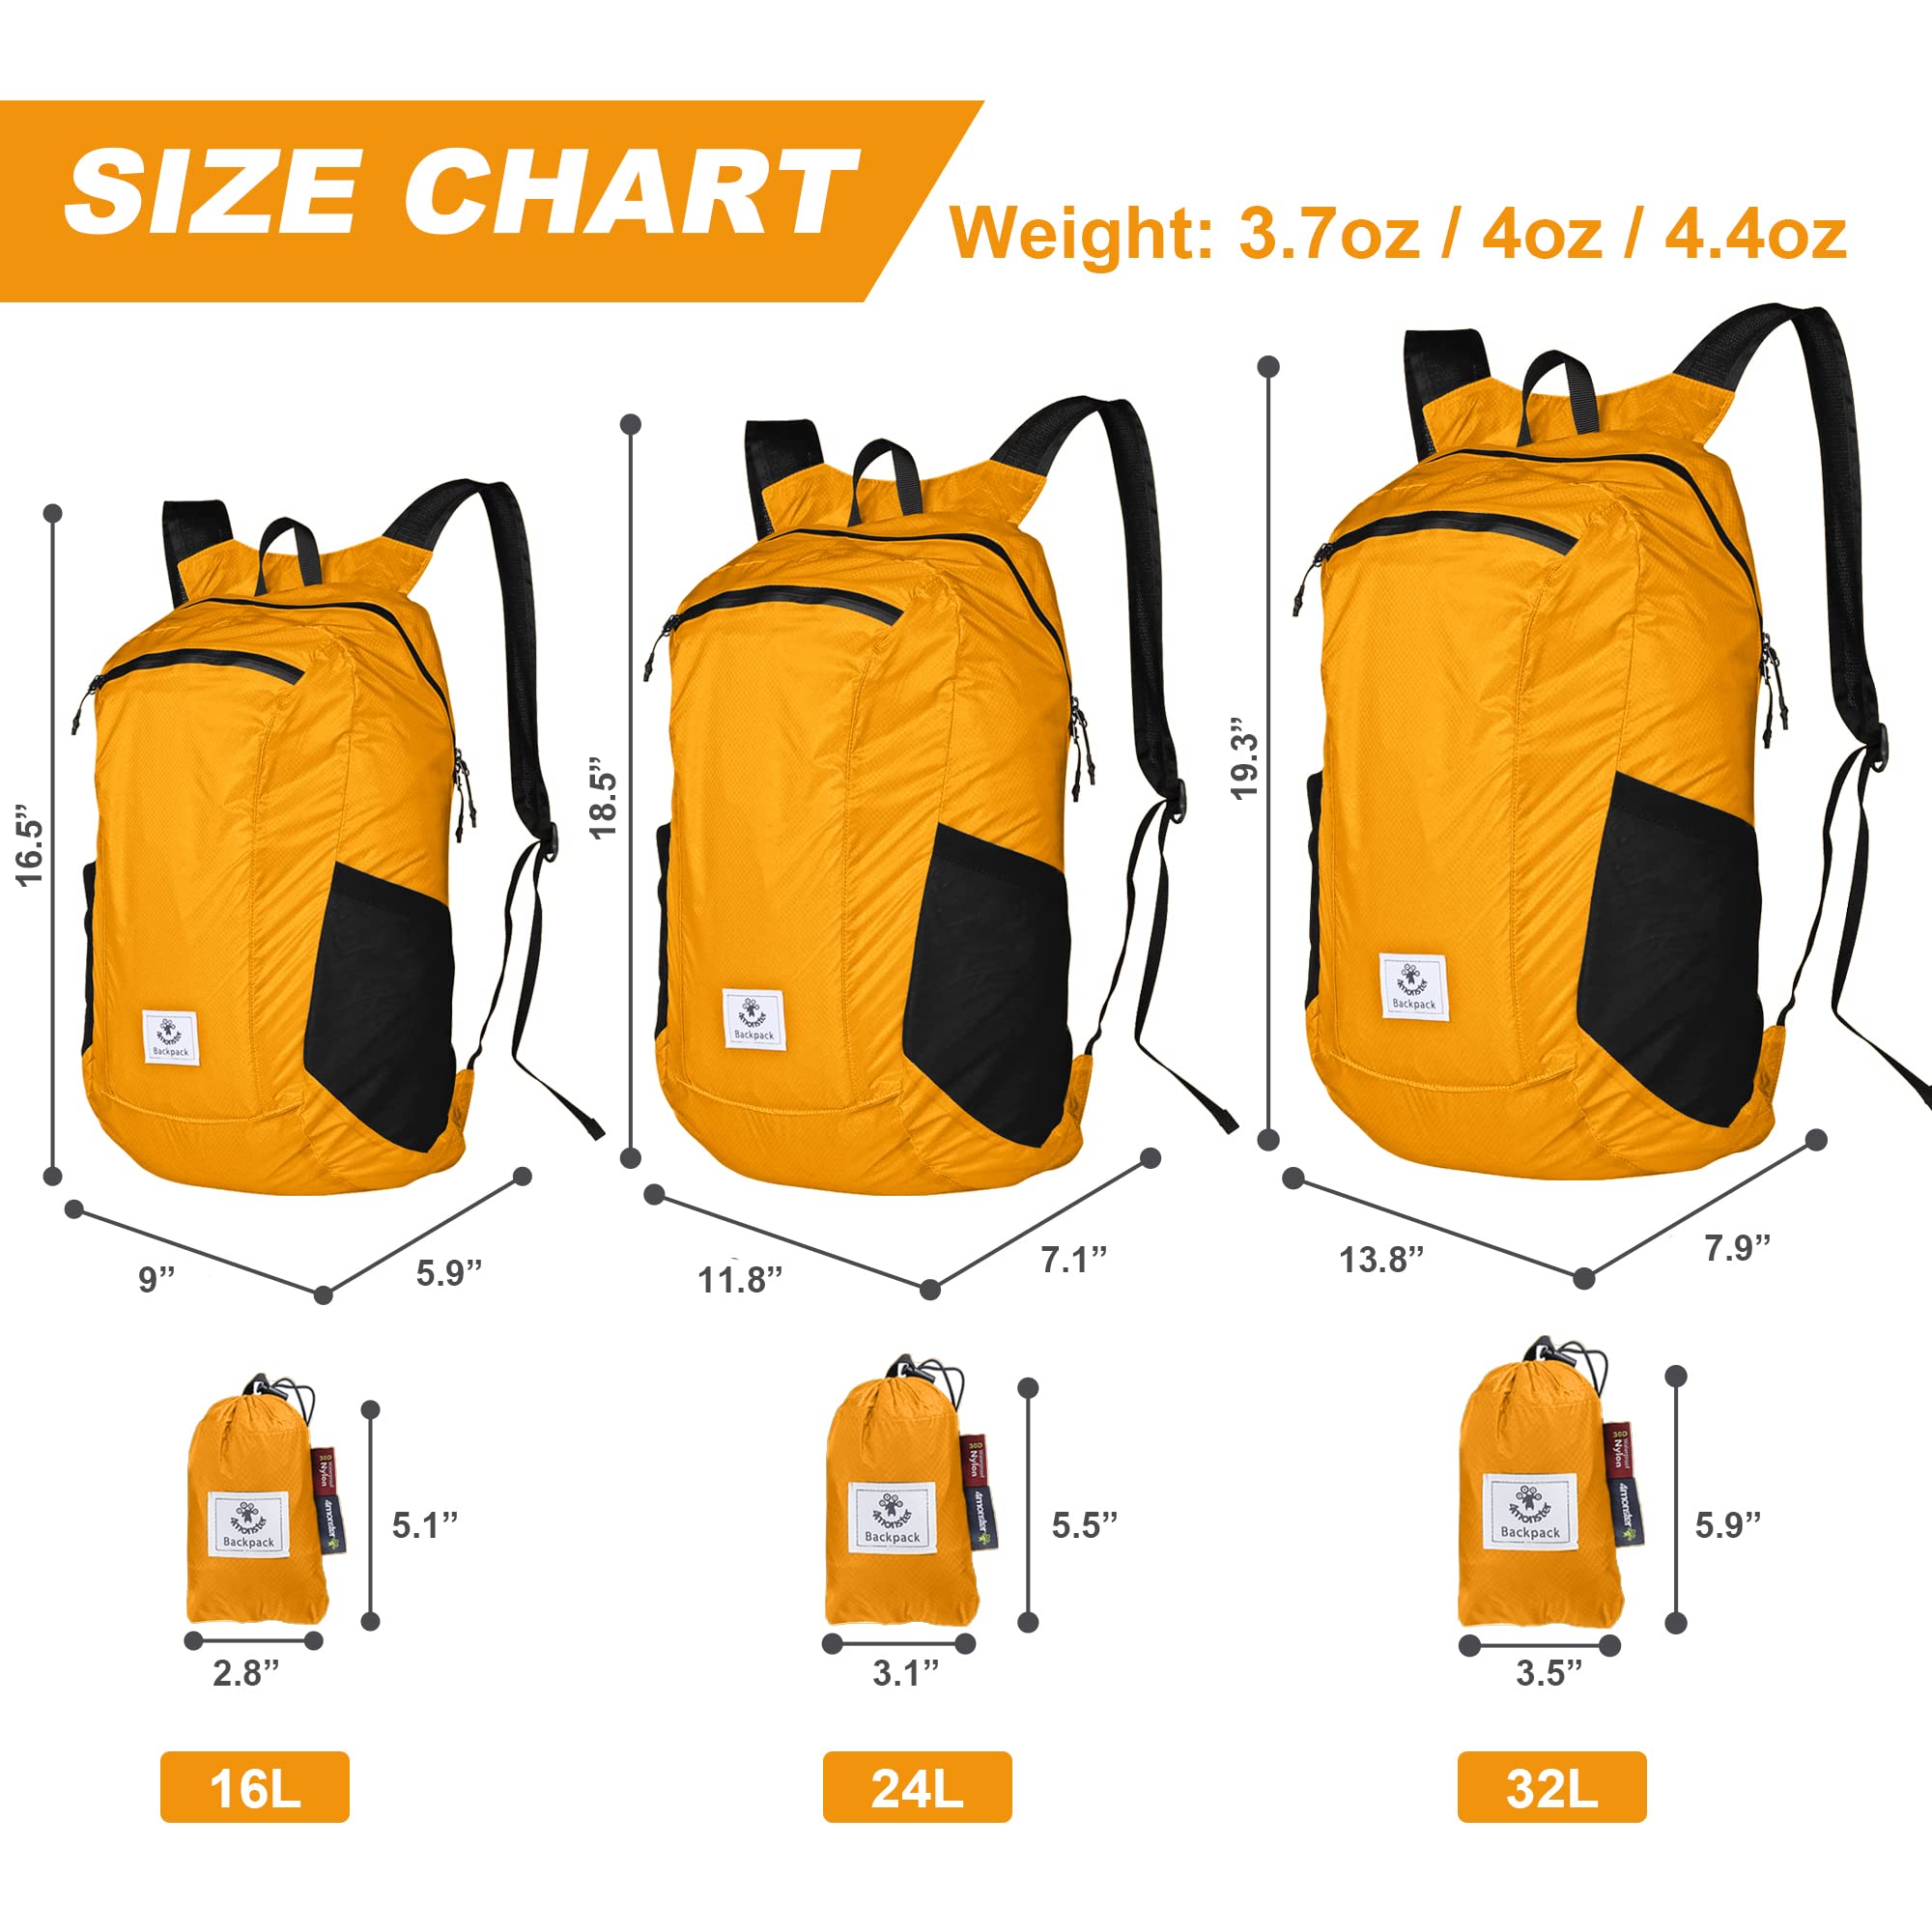 4Monster Hiking Daypack,Water Resistant Lightweight Packable Backpack for Travel Camping Outdoor (A-orange, 24L)